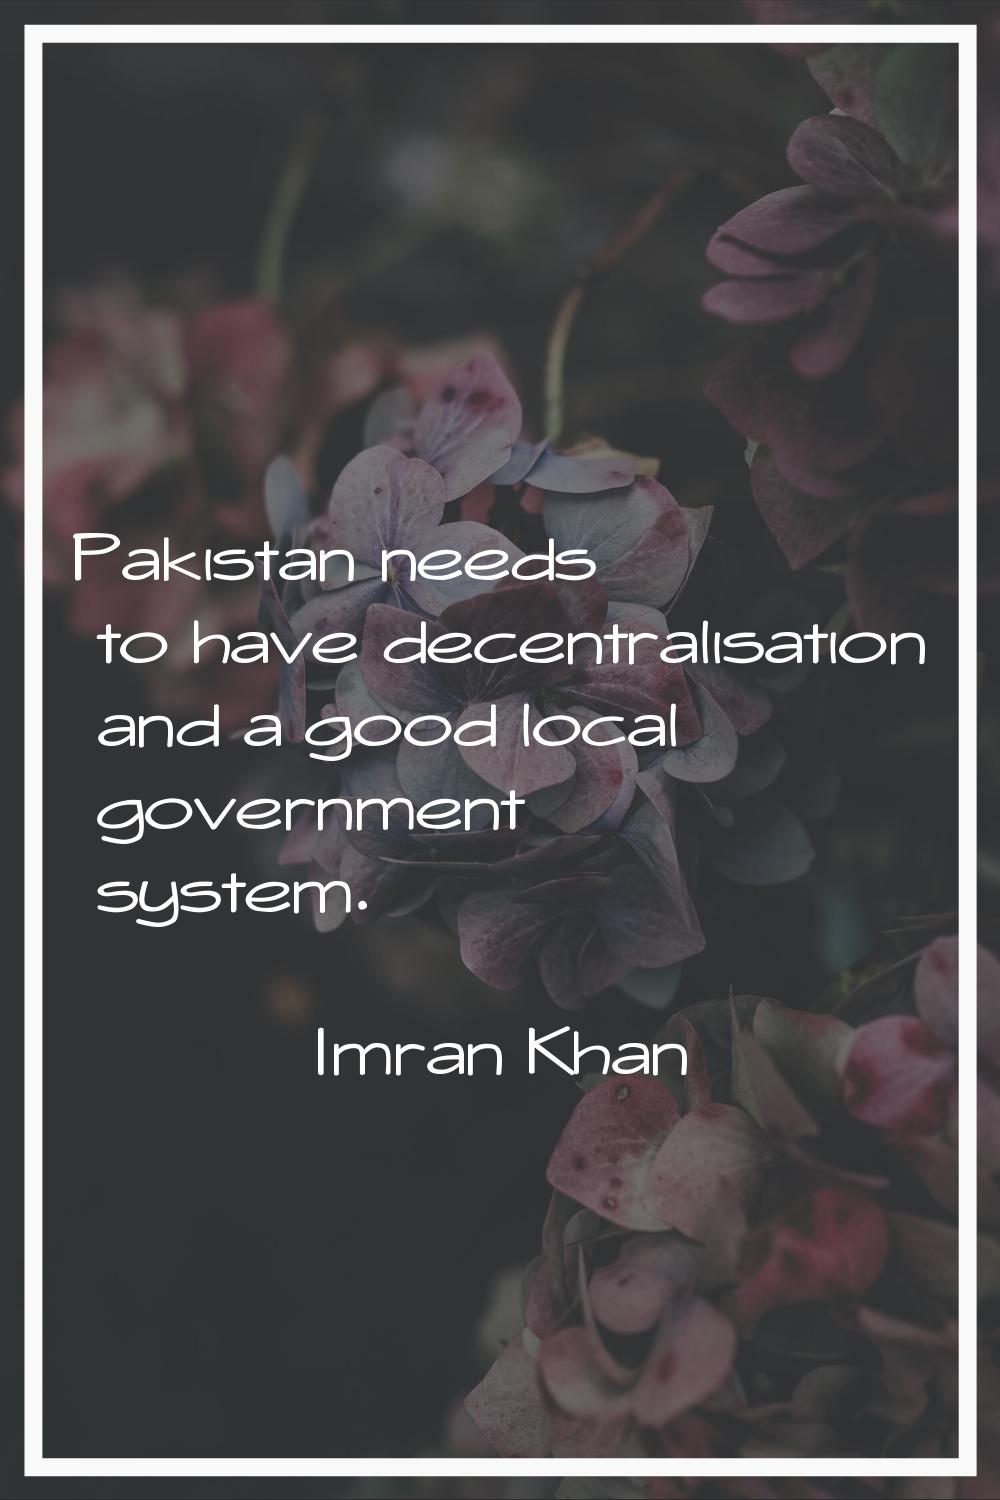 Pakistan needs to have decentralisation and a good local government system.